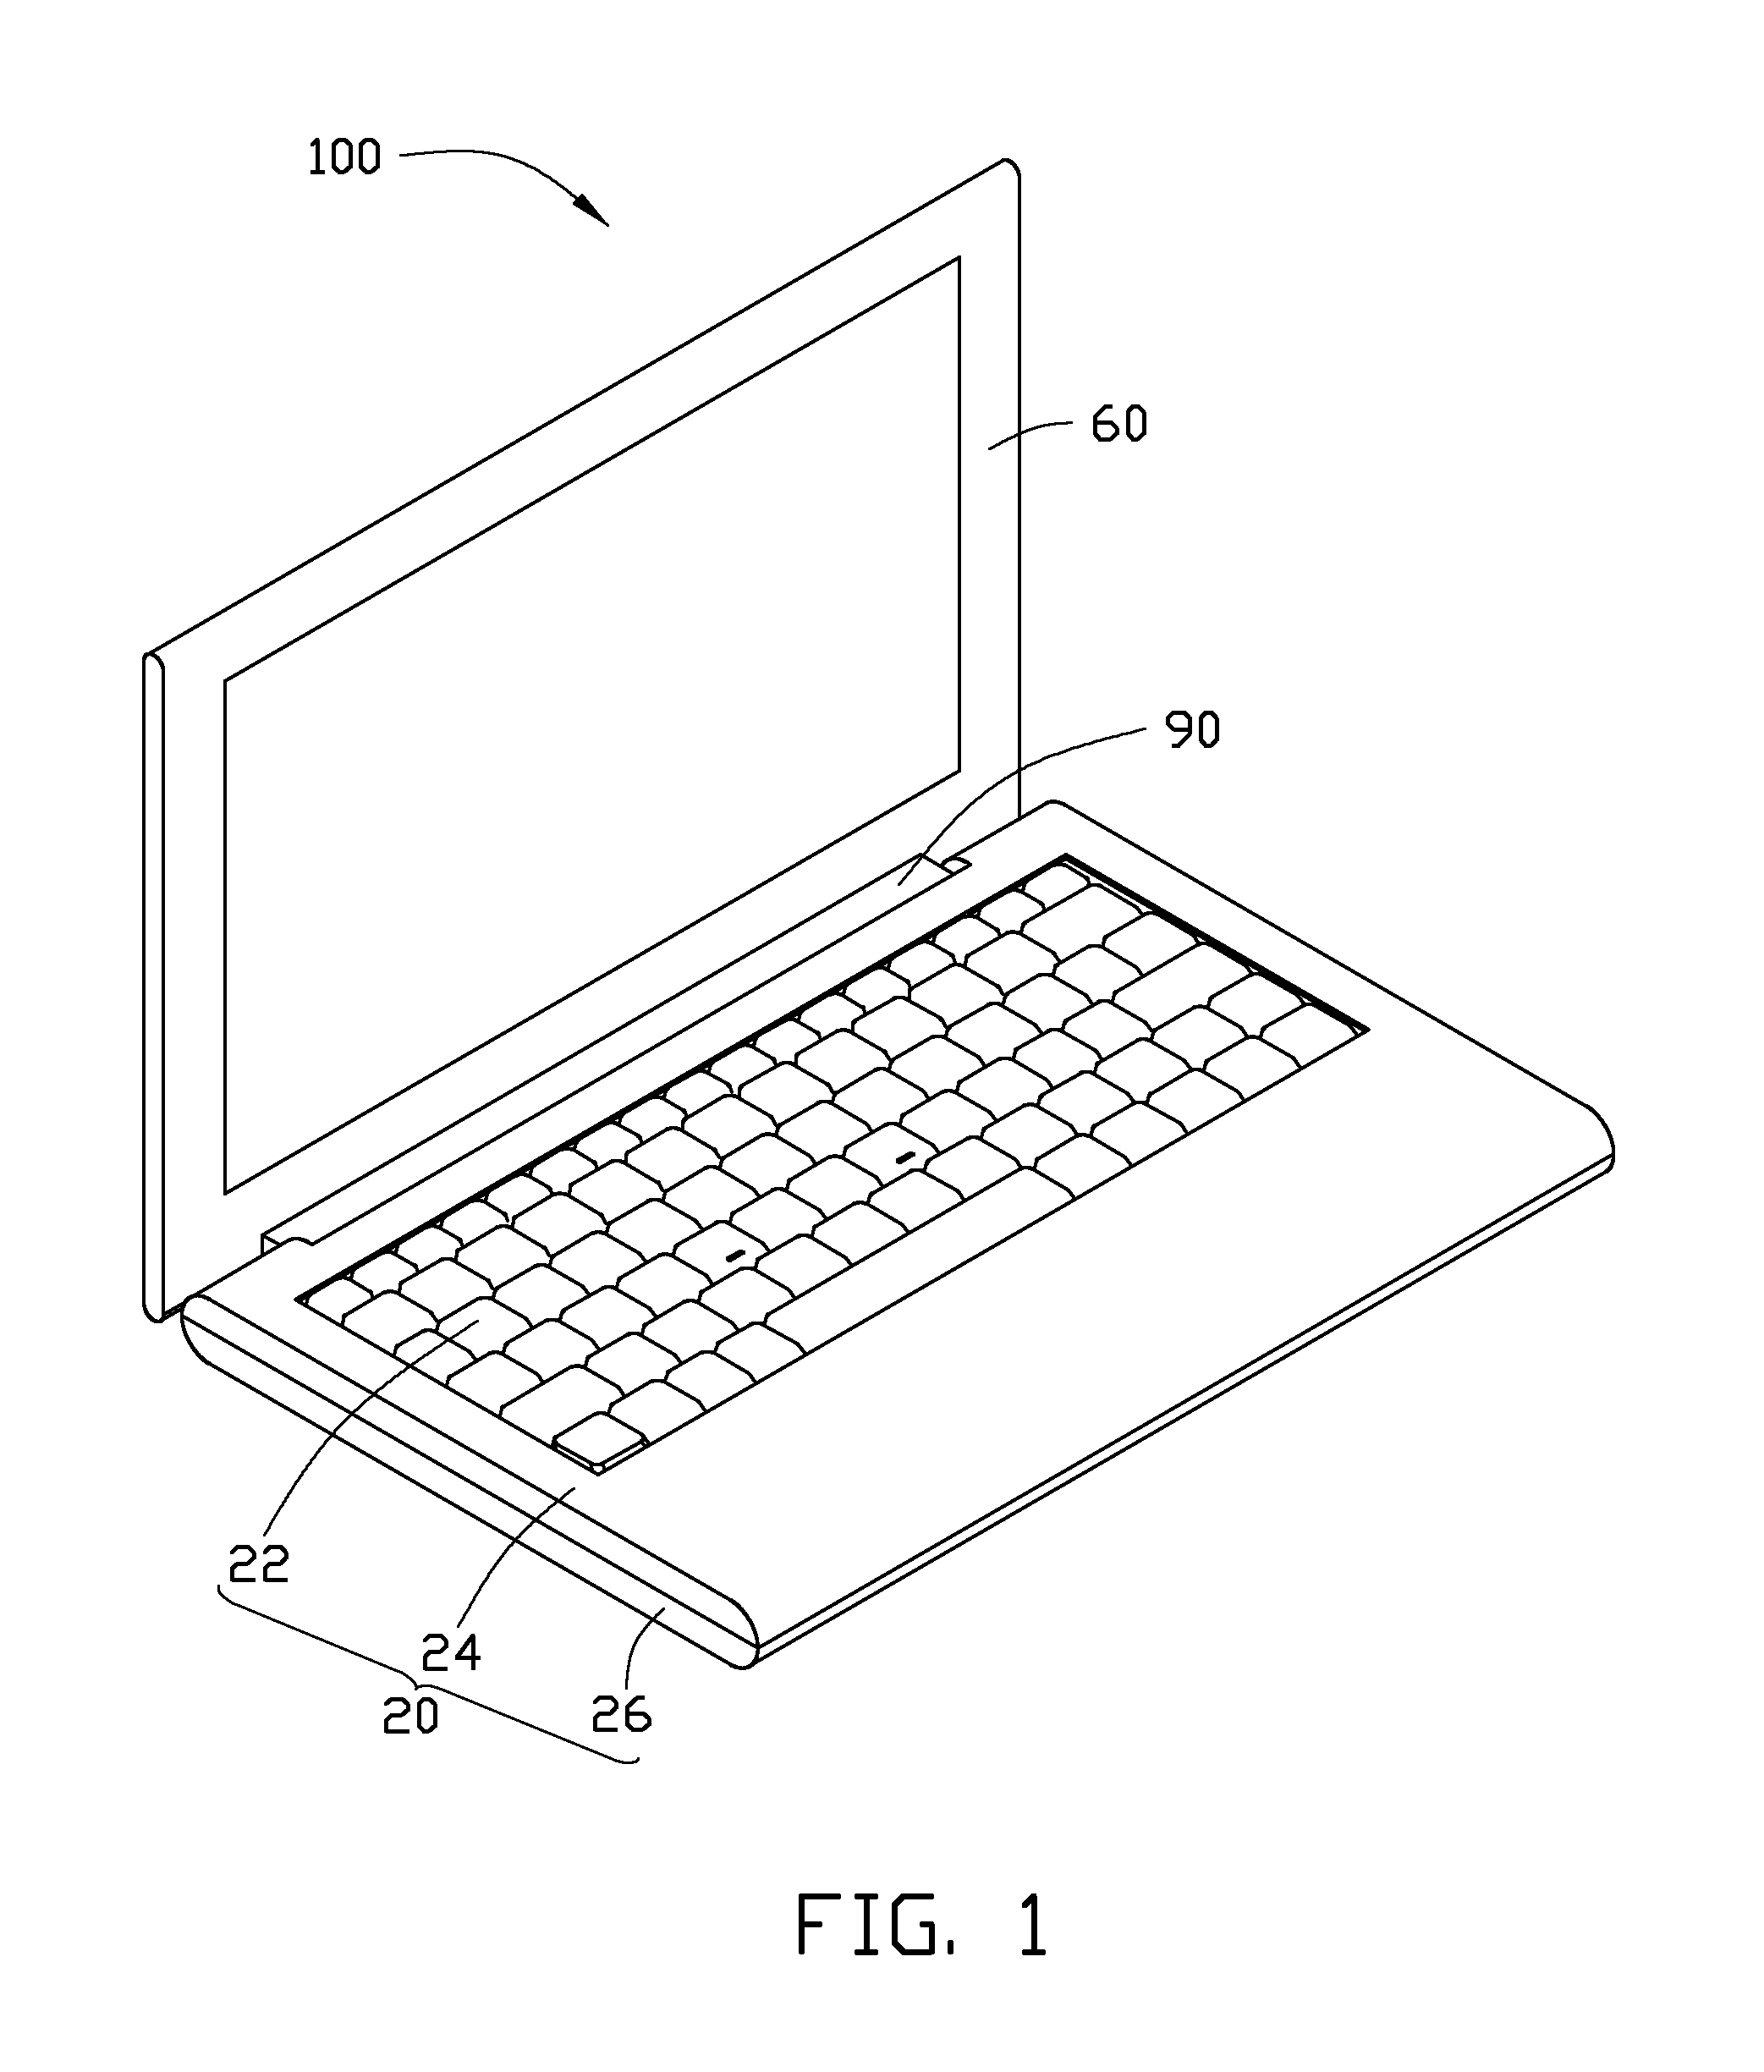 Portable computer with heat dissipation unit